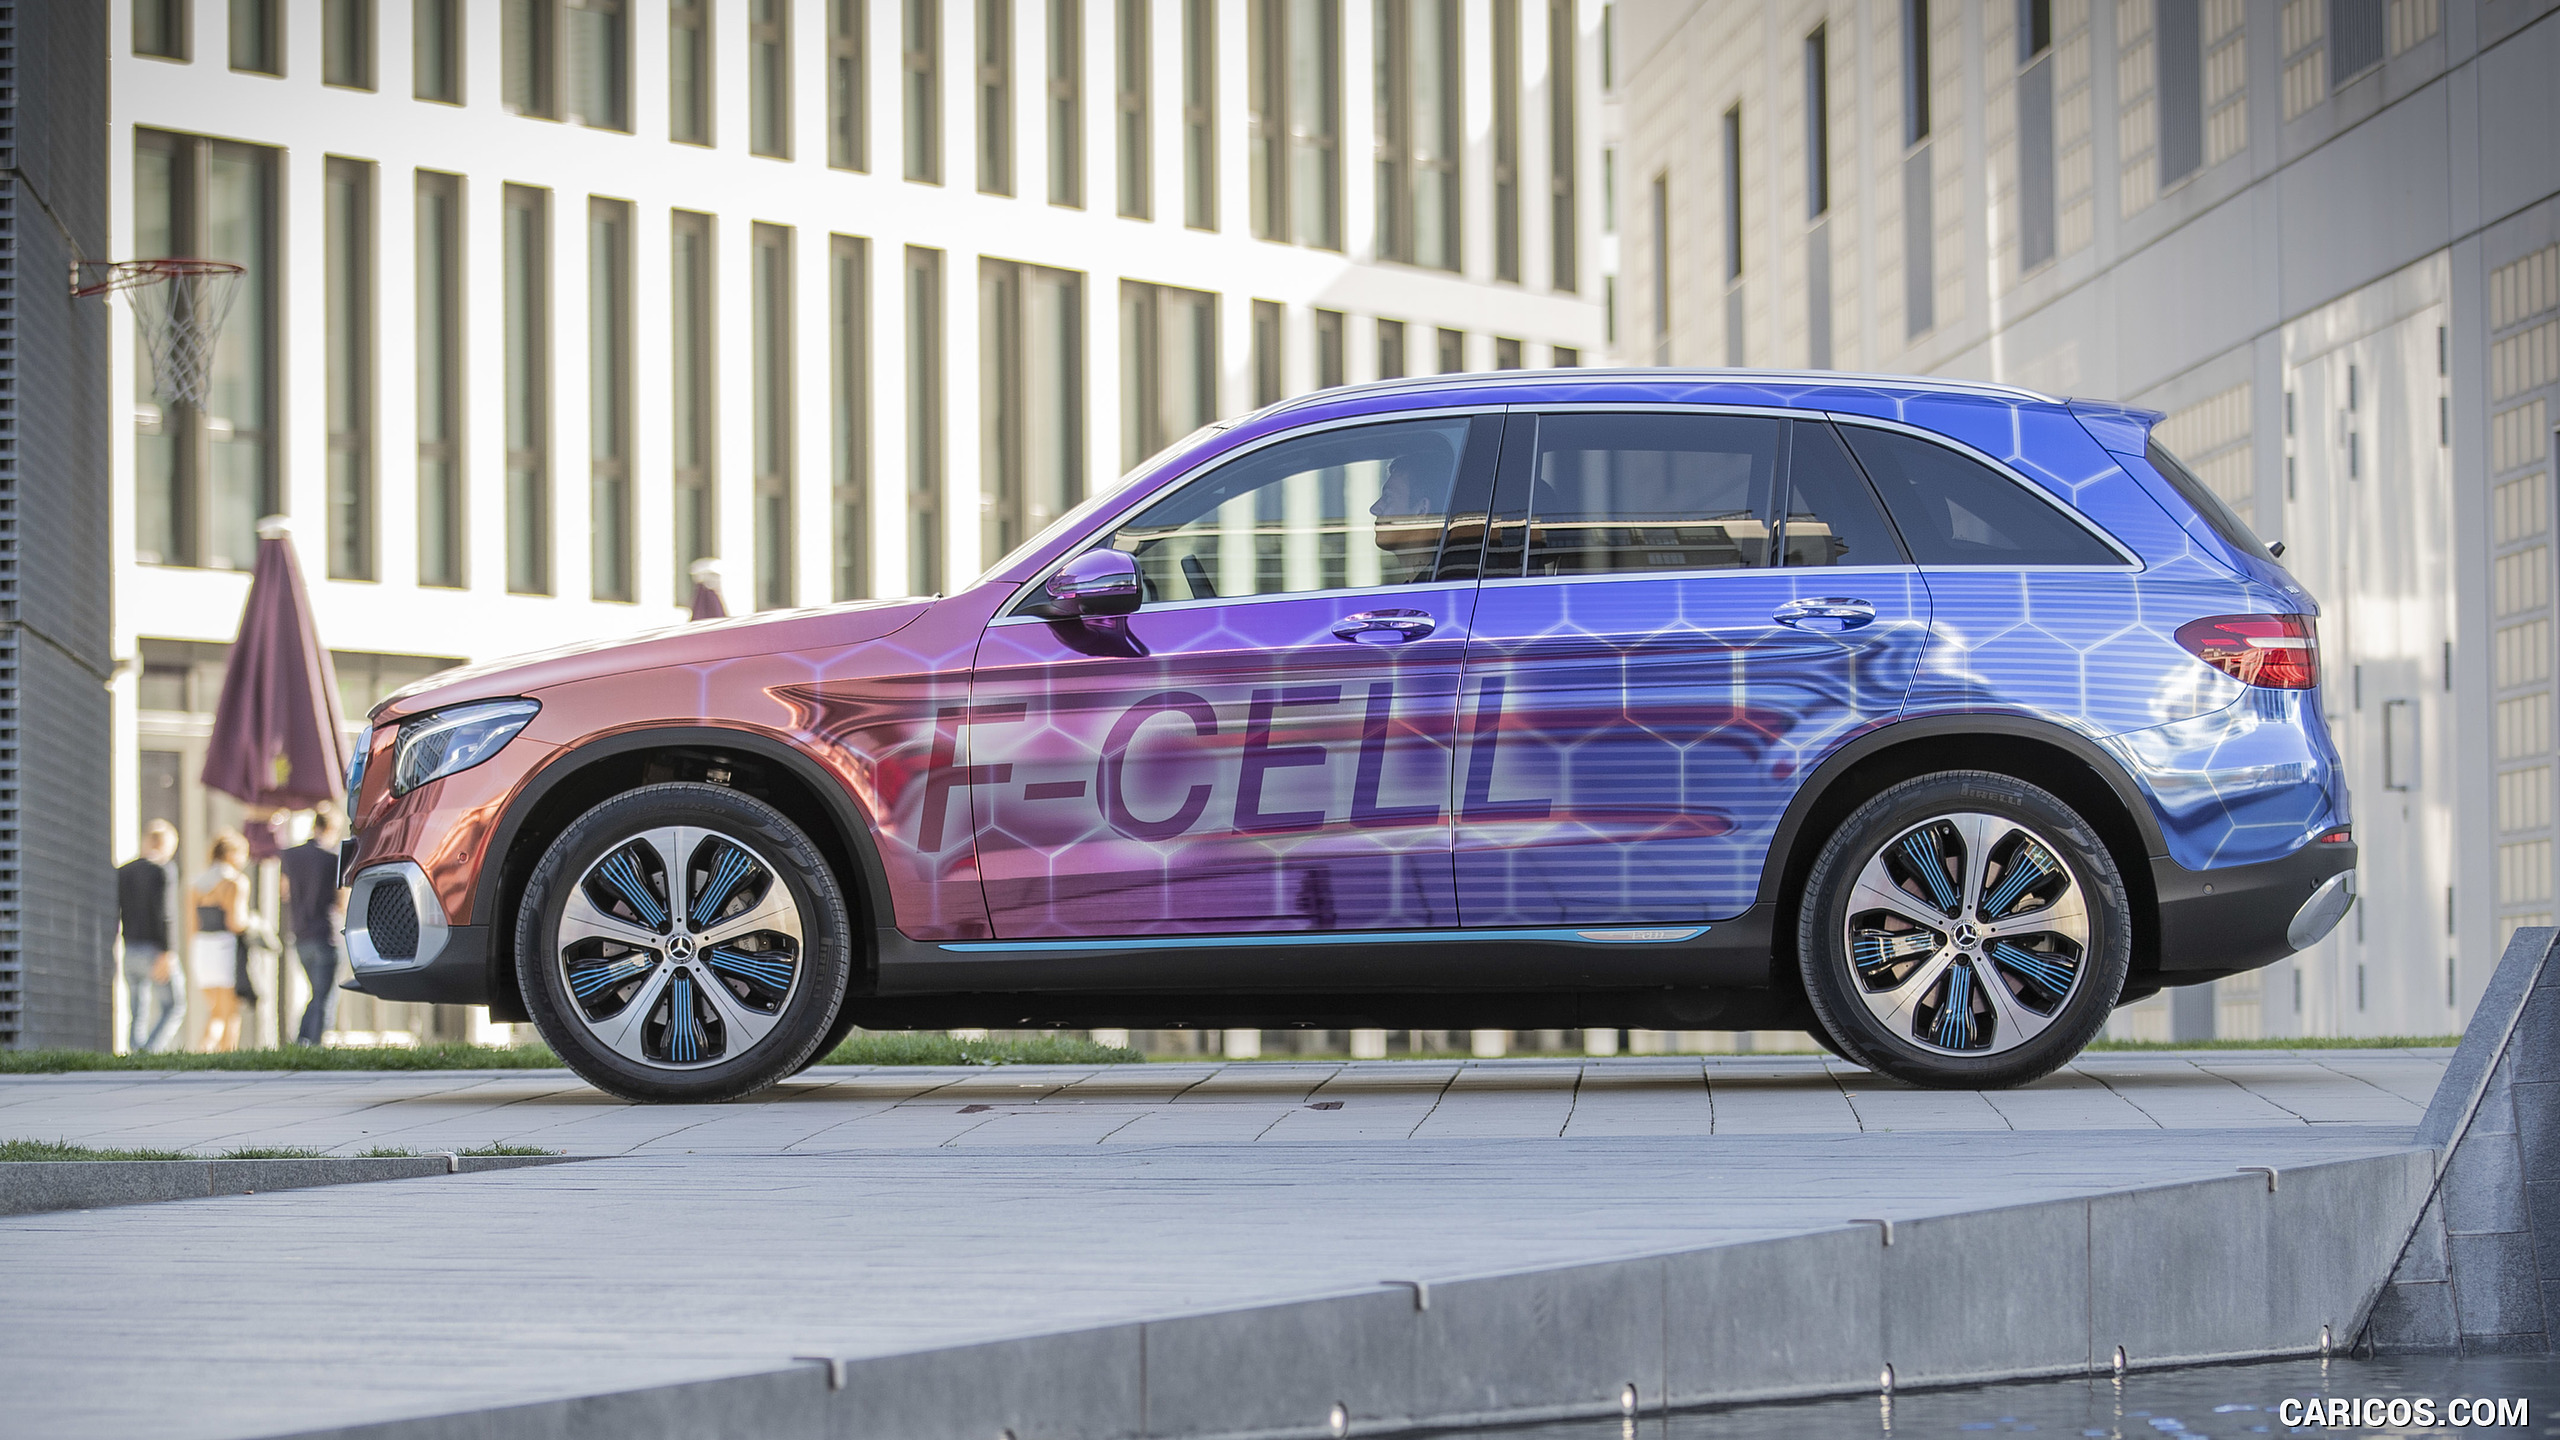 2019 Mercedes-Benz GLC F-CELL - Side, #72 of 95